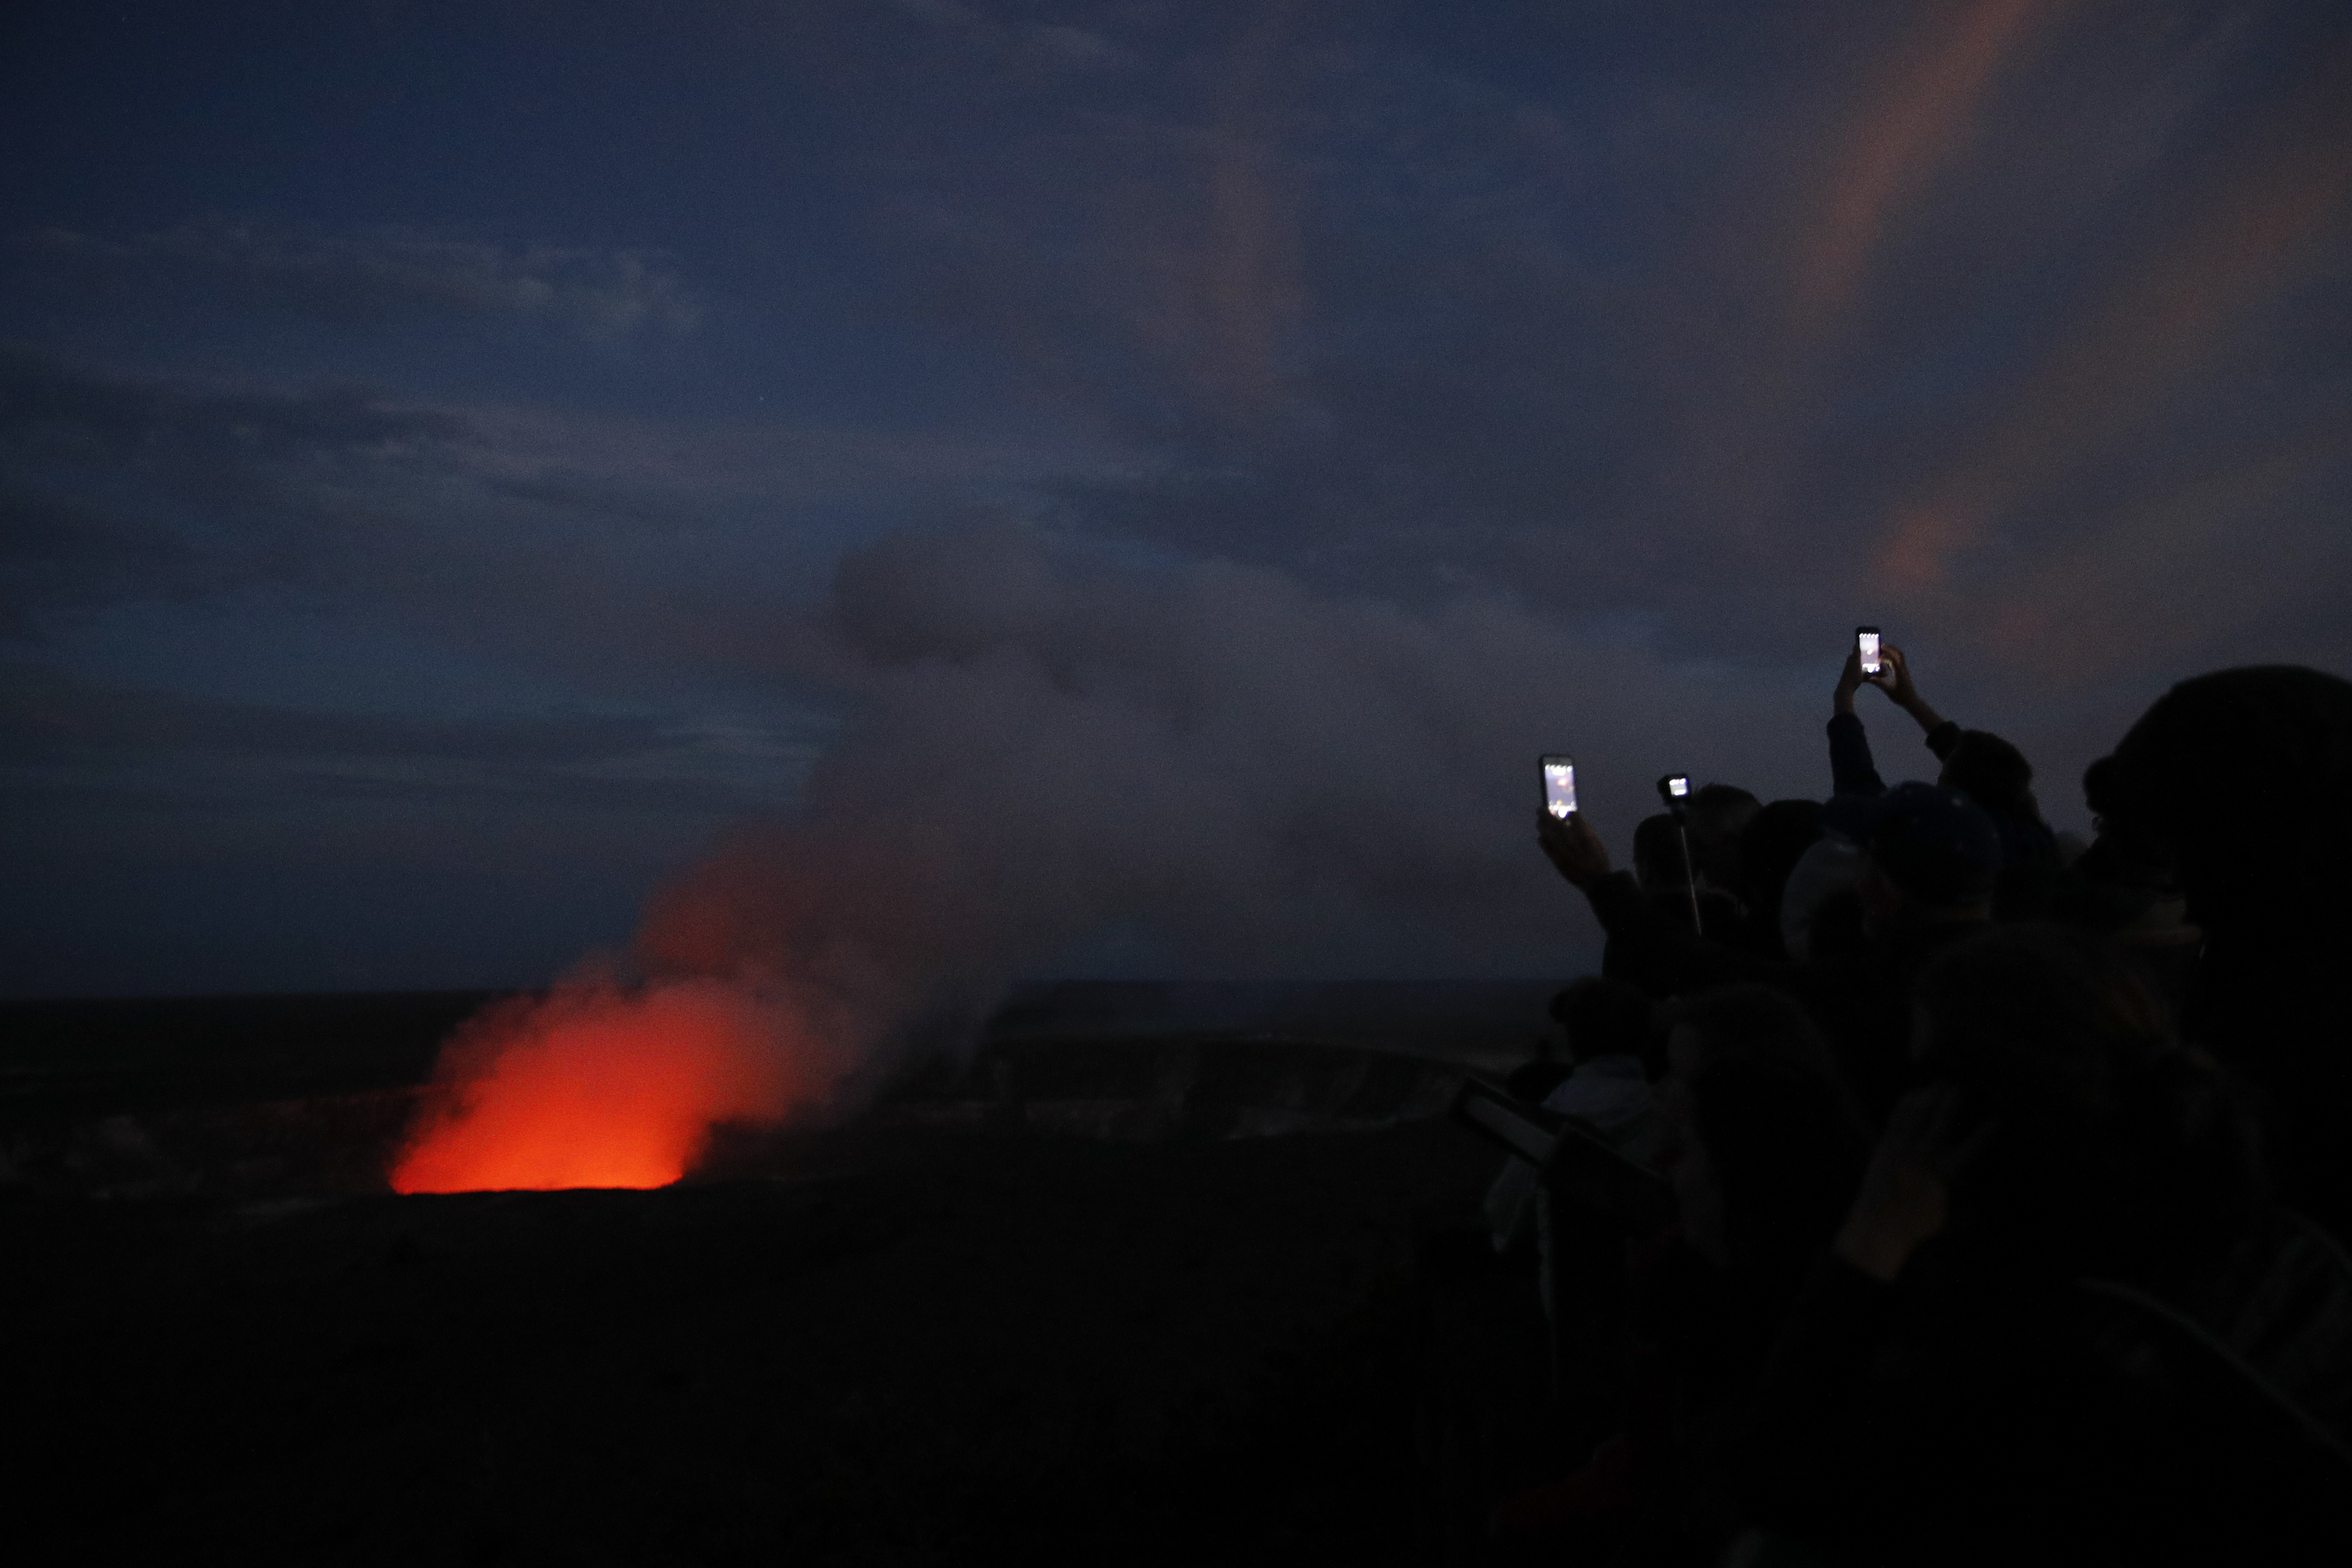 Visitors take pictures as Kilauea's summit crater glows red in Volcanoes National Park, Hawaii. Wednesday, May 9, 2018. Geologists warned Wednesday that Hawaii's Kilauea volcano could erupt explosively and send boulders, rocks and ash into the air around its summit in the coming weeks. (AP Photo/Jae C. Hong)